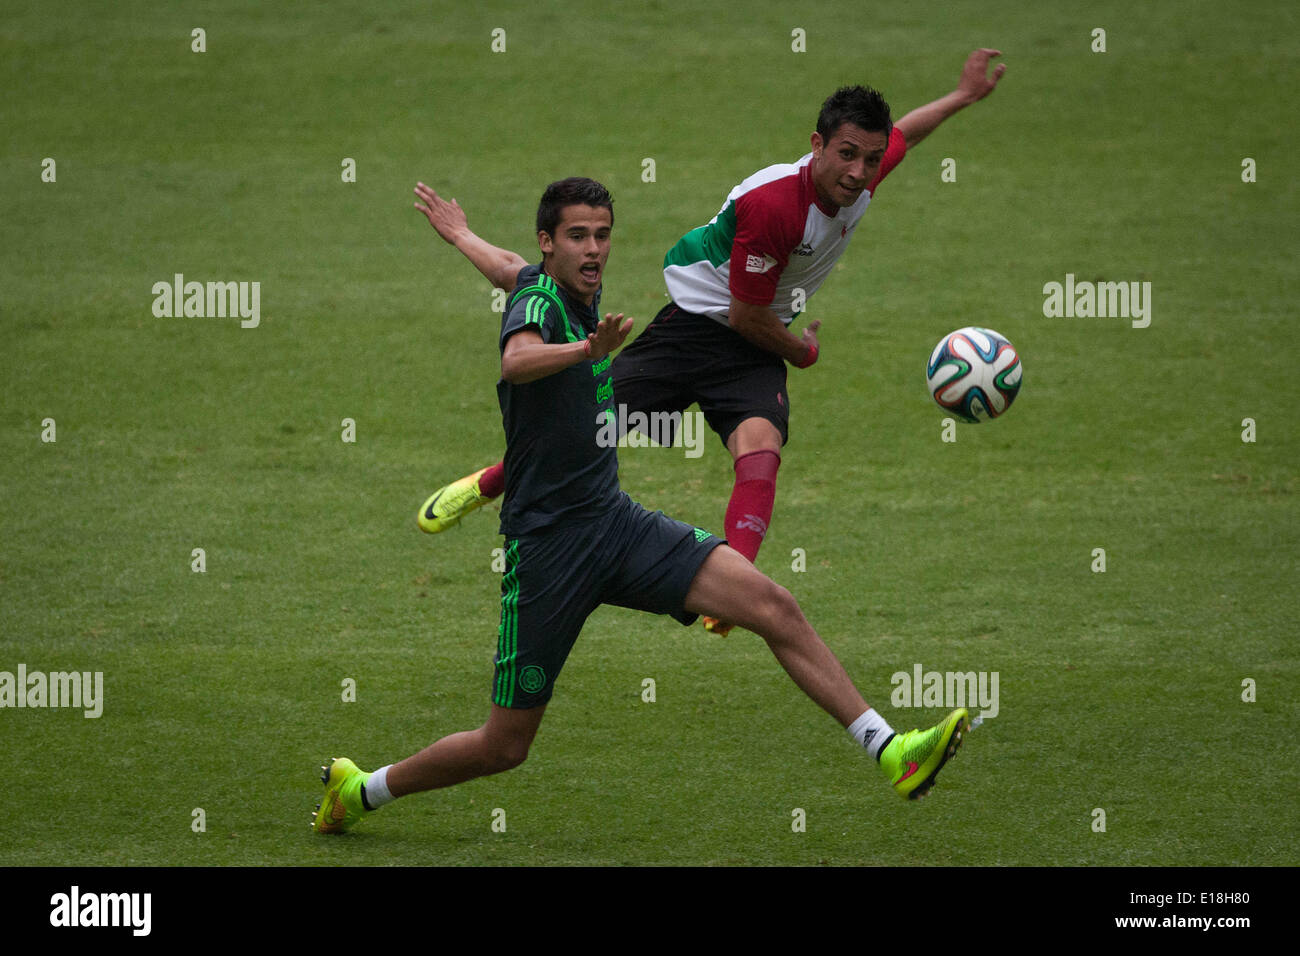 Mexico City, Mexico. 26th May, 2014. Player Diego Reyes (front) of Mexico's national soccer team, takes part in a training session before the Brazil 2014 FIFA World Cup, in the Azteca Stadium, in Mexico City, capital of Mexico, on May 26, 2014. Credit:  Pedro Mera/Xinhua/Alamy Live News Stock Photo